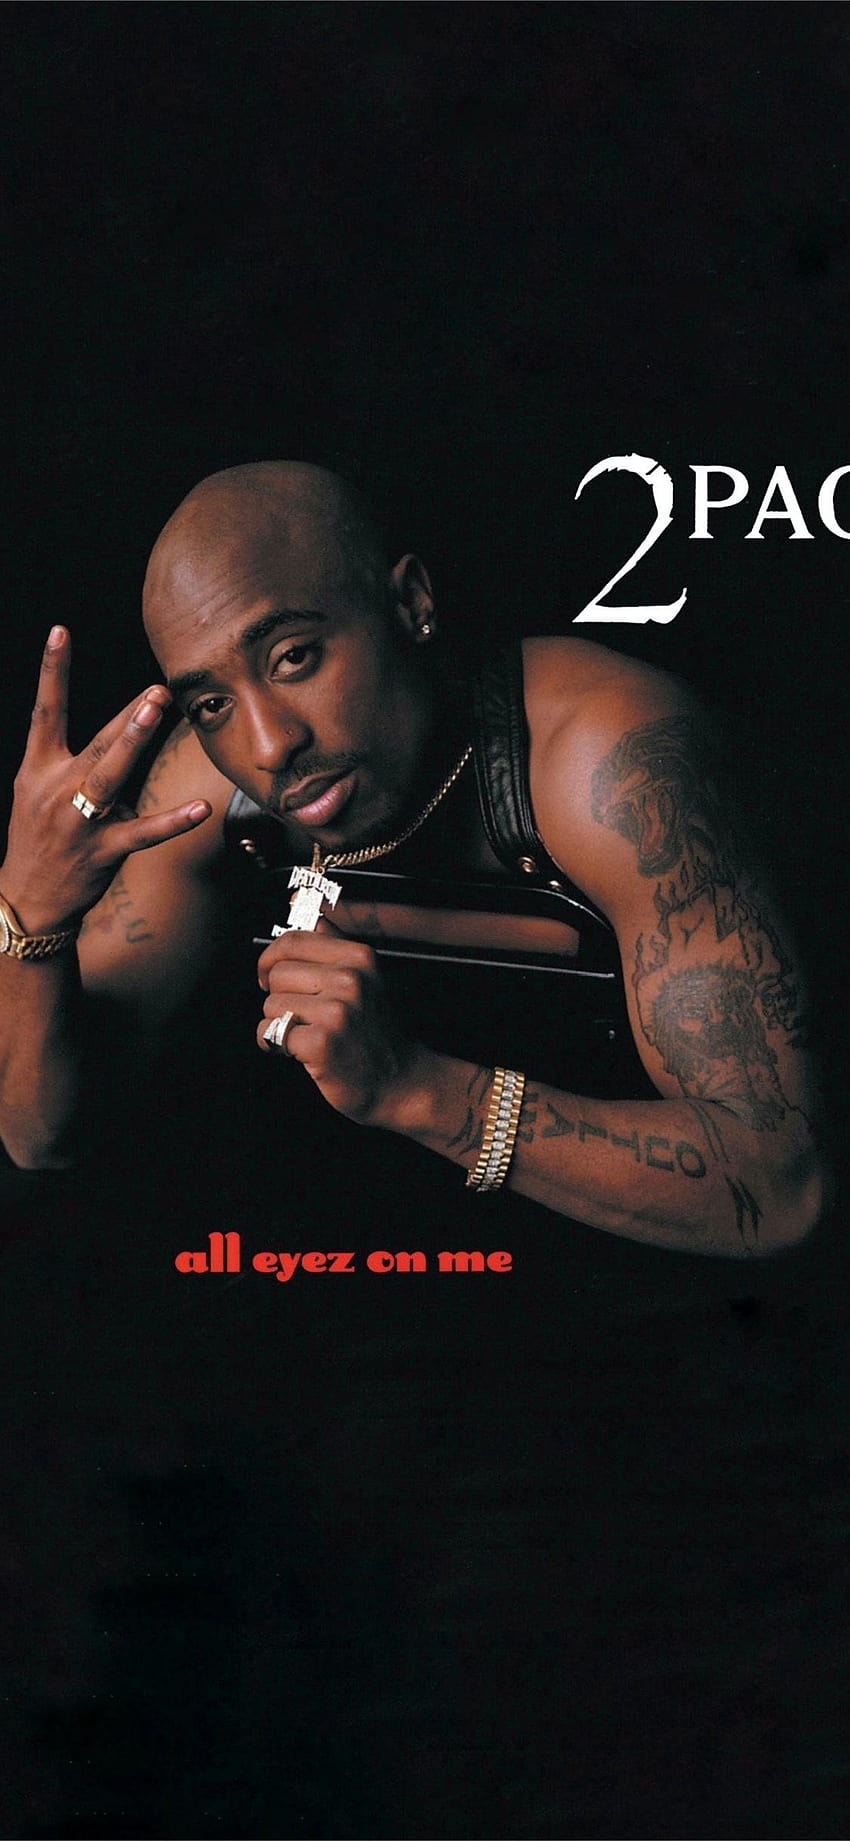 2Pac for iPhone iPhone 11, all eyez on me HD phone wallpaper